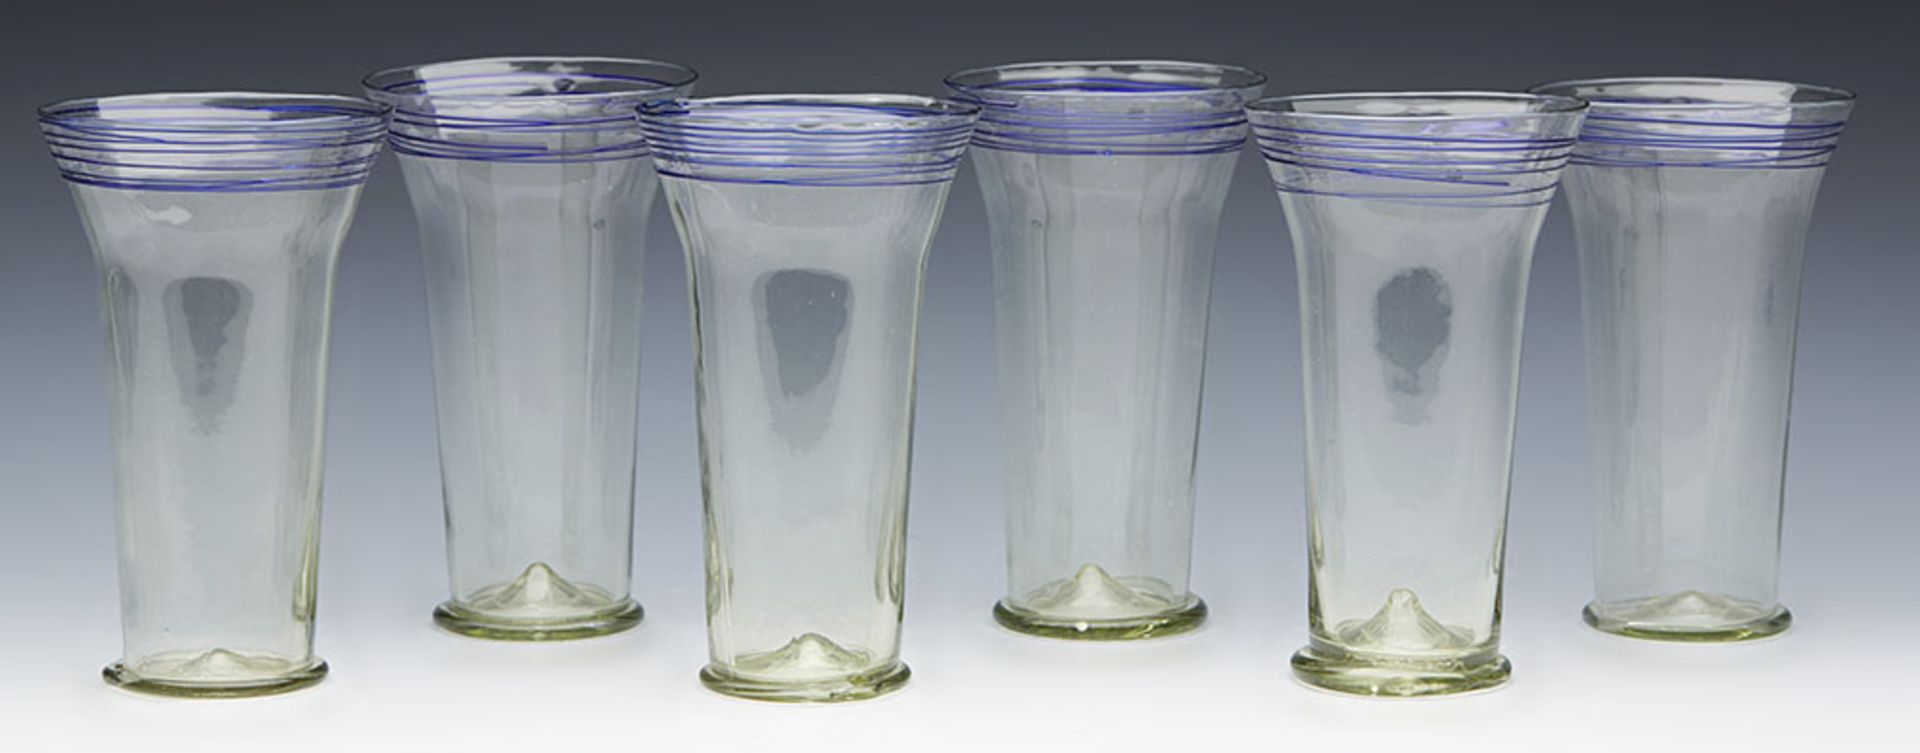 ARTS & CRAFTS SET SIX TUMBLER GLASSES ATTRIBUTED TO JAMES POWELL C.1890